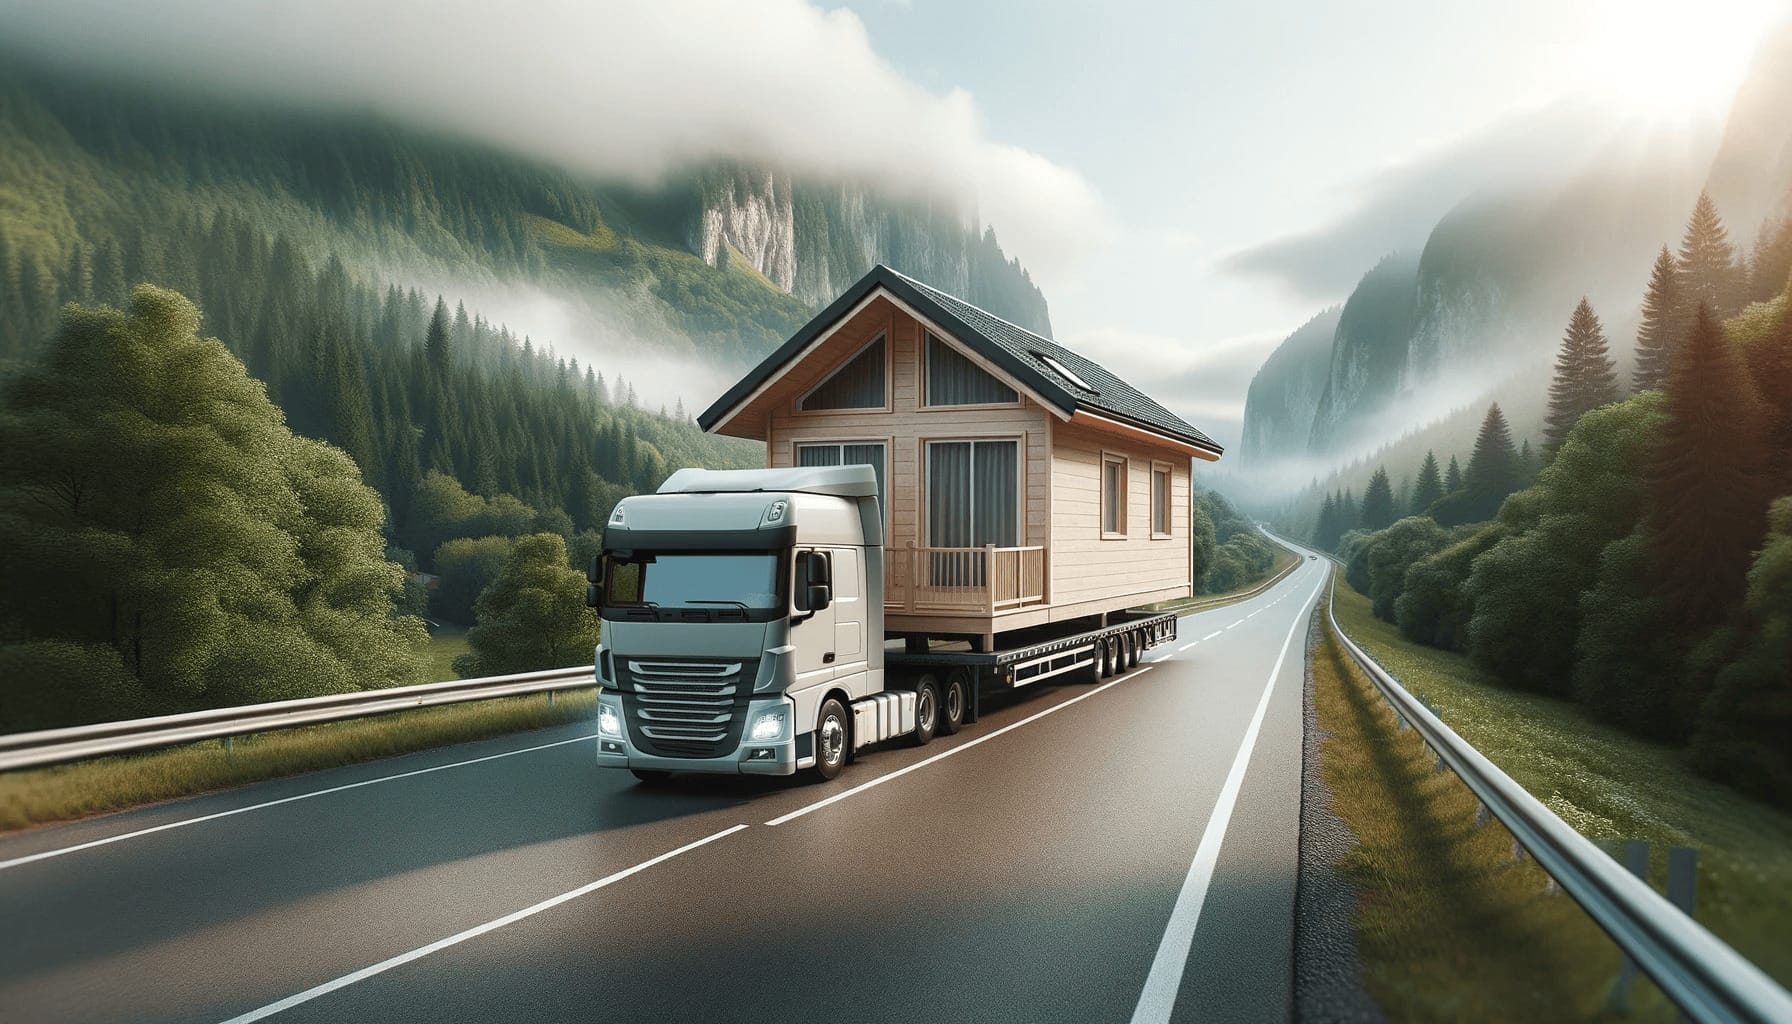 DALL·E 2023 10 19 09.12.44 Photo of a portable cabin being transported on a truck through a scenic route. The cabins design is modern and the scene emphasizes its mobility and